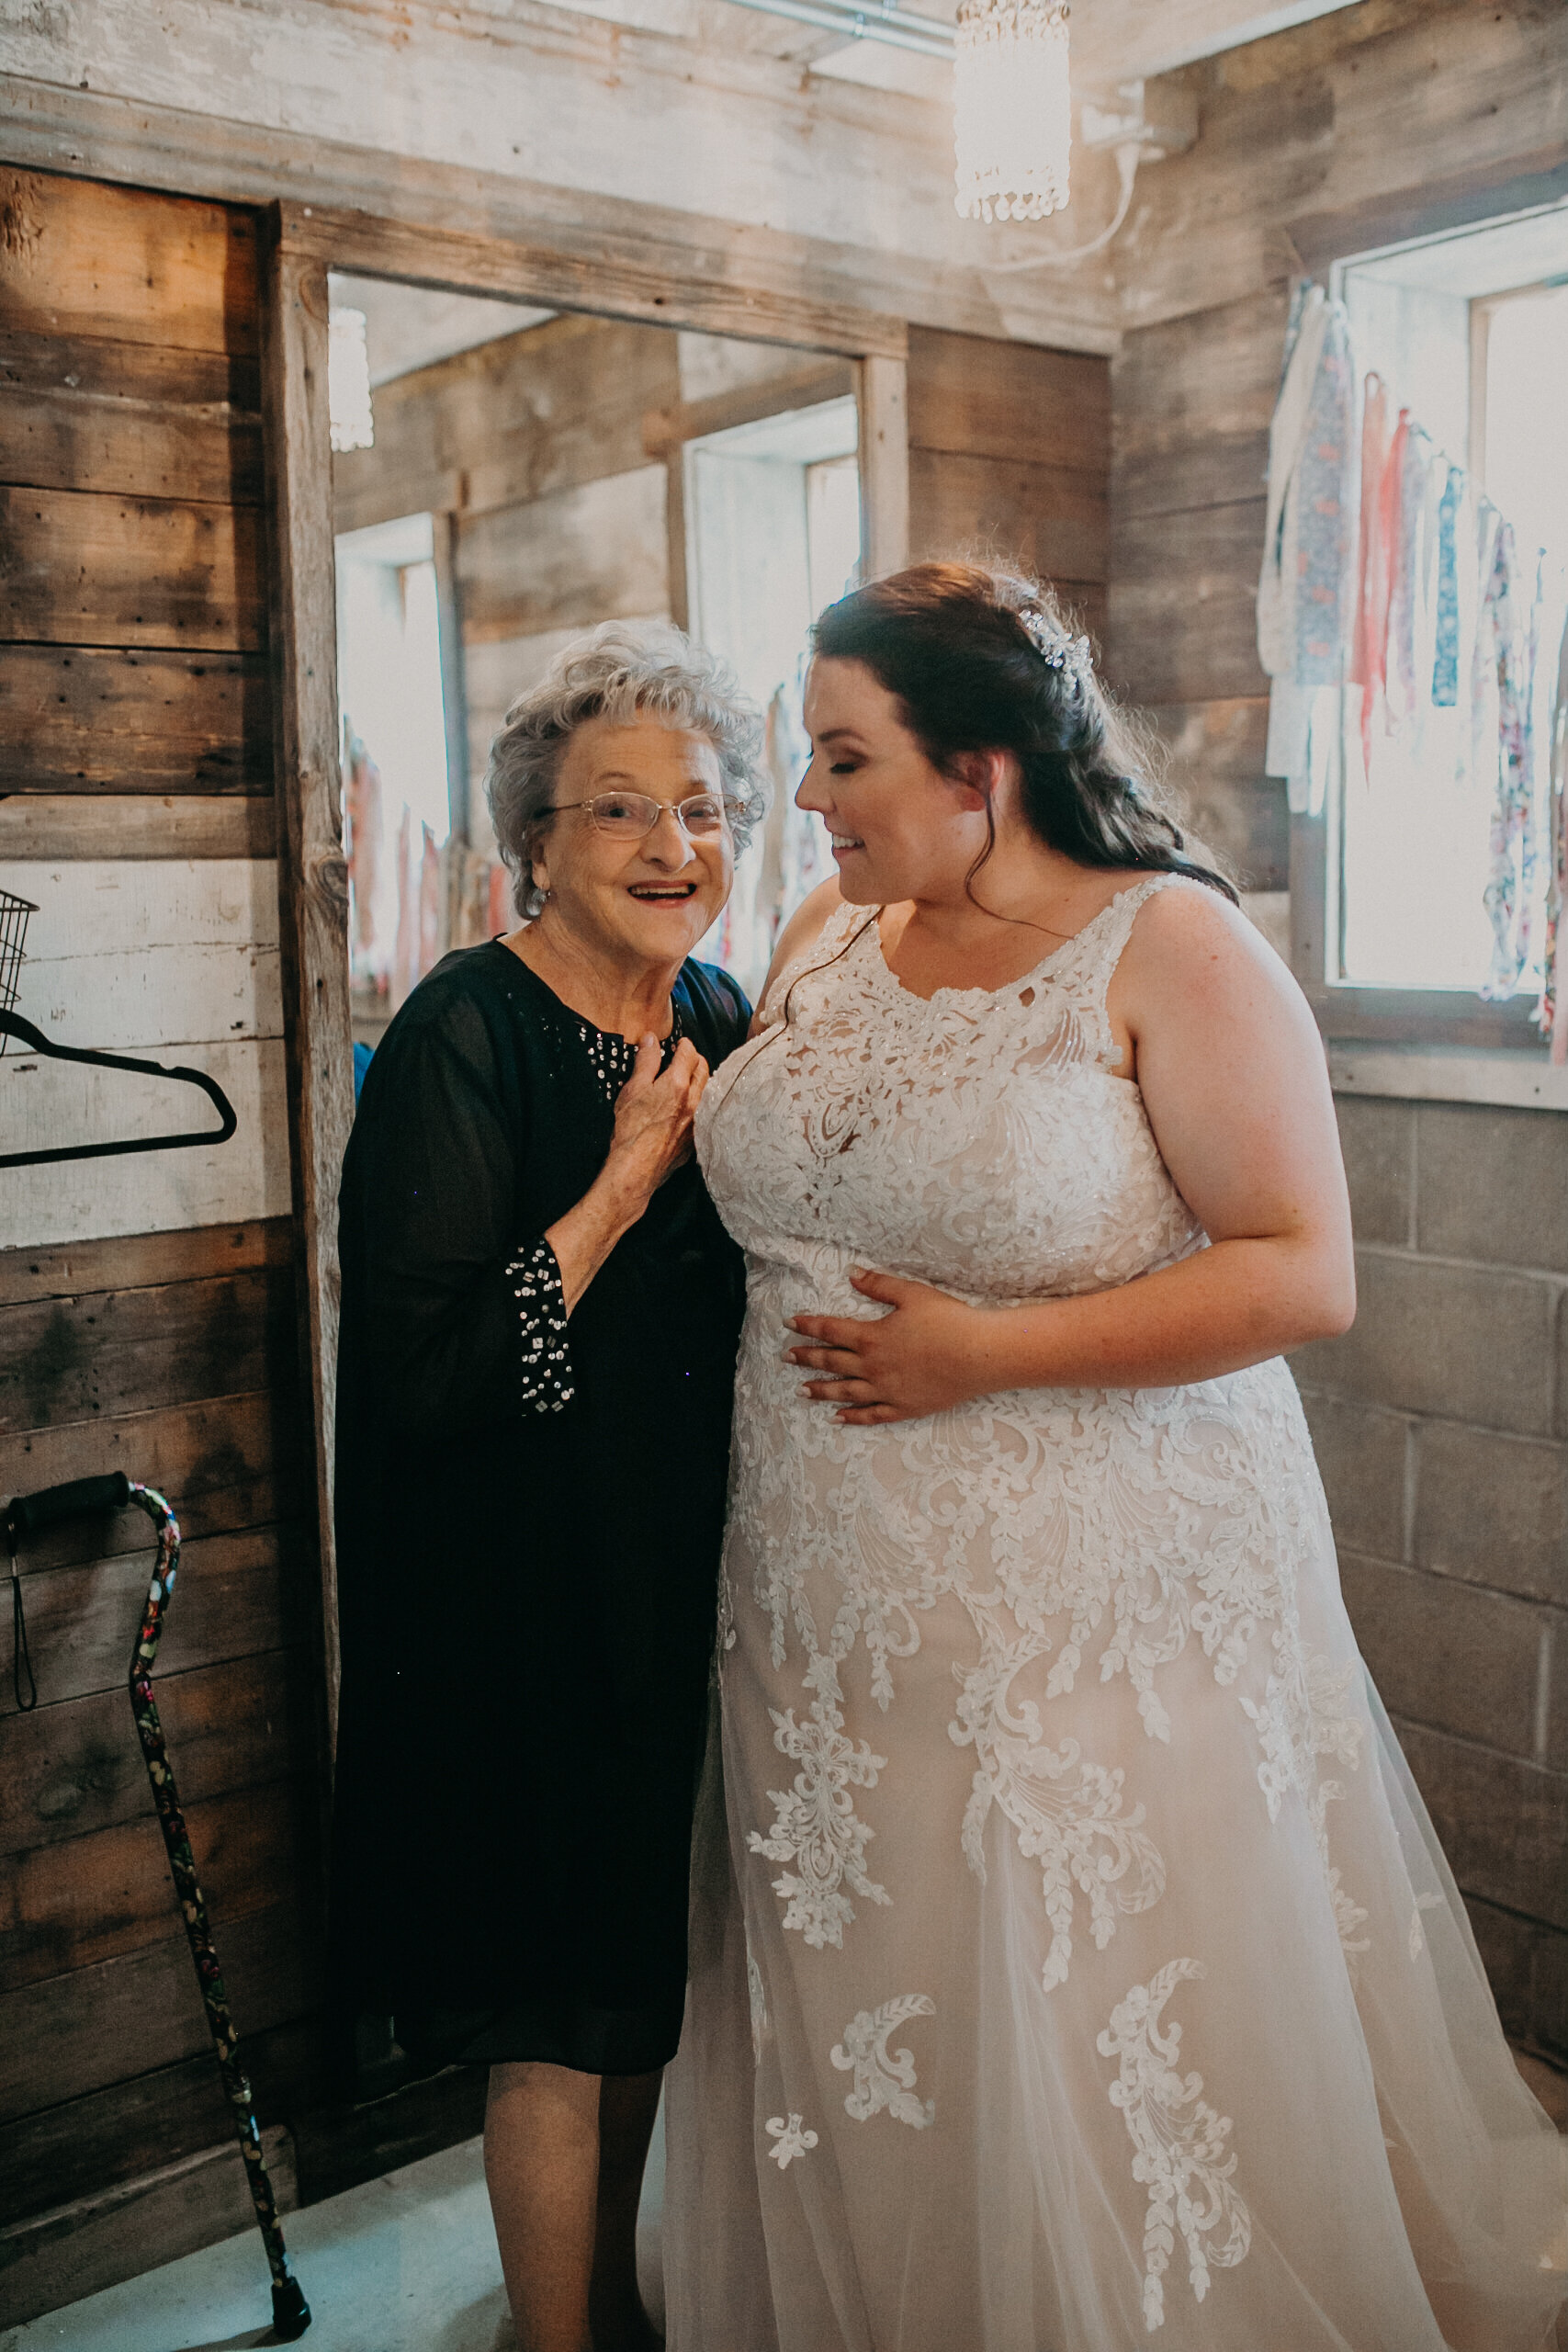  Andrea Wagner Photography captures wedding day with grandma at Mumm Barn 